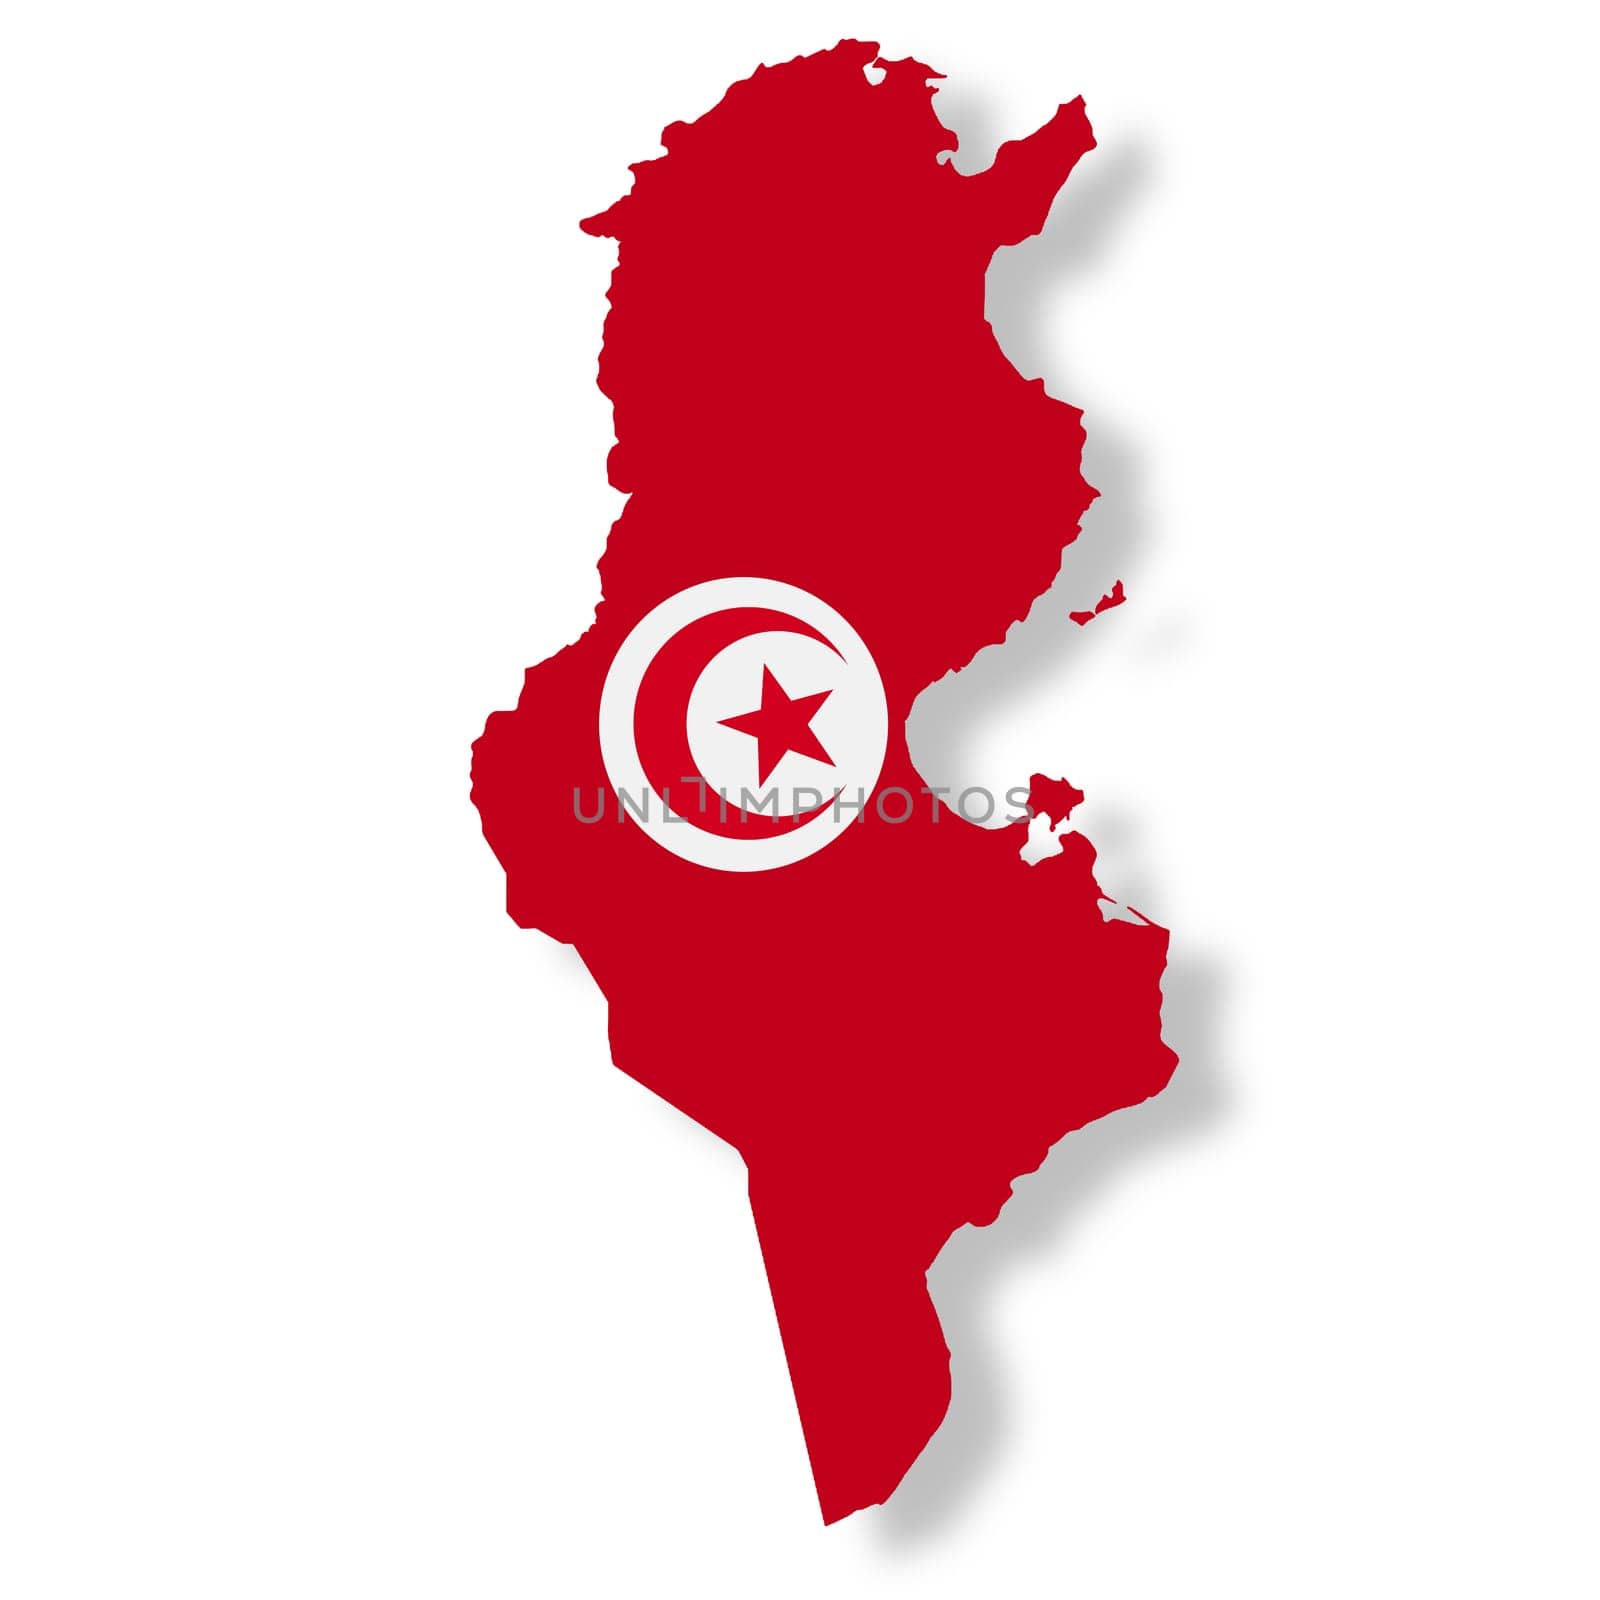 A Tunisia flag map on white background with clipping path 3d illustration